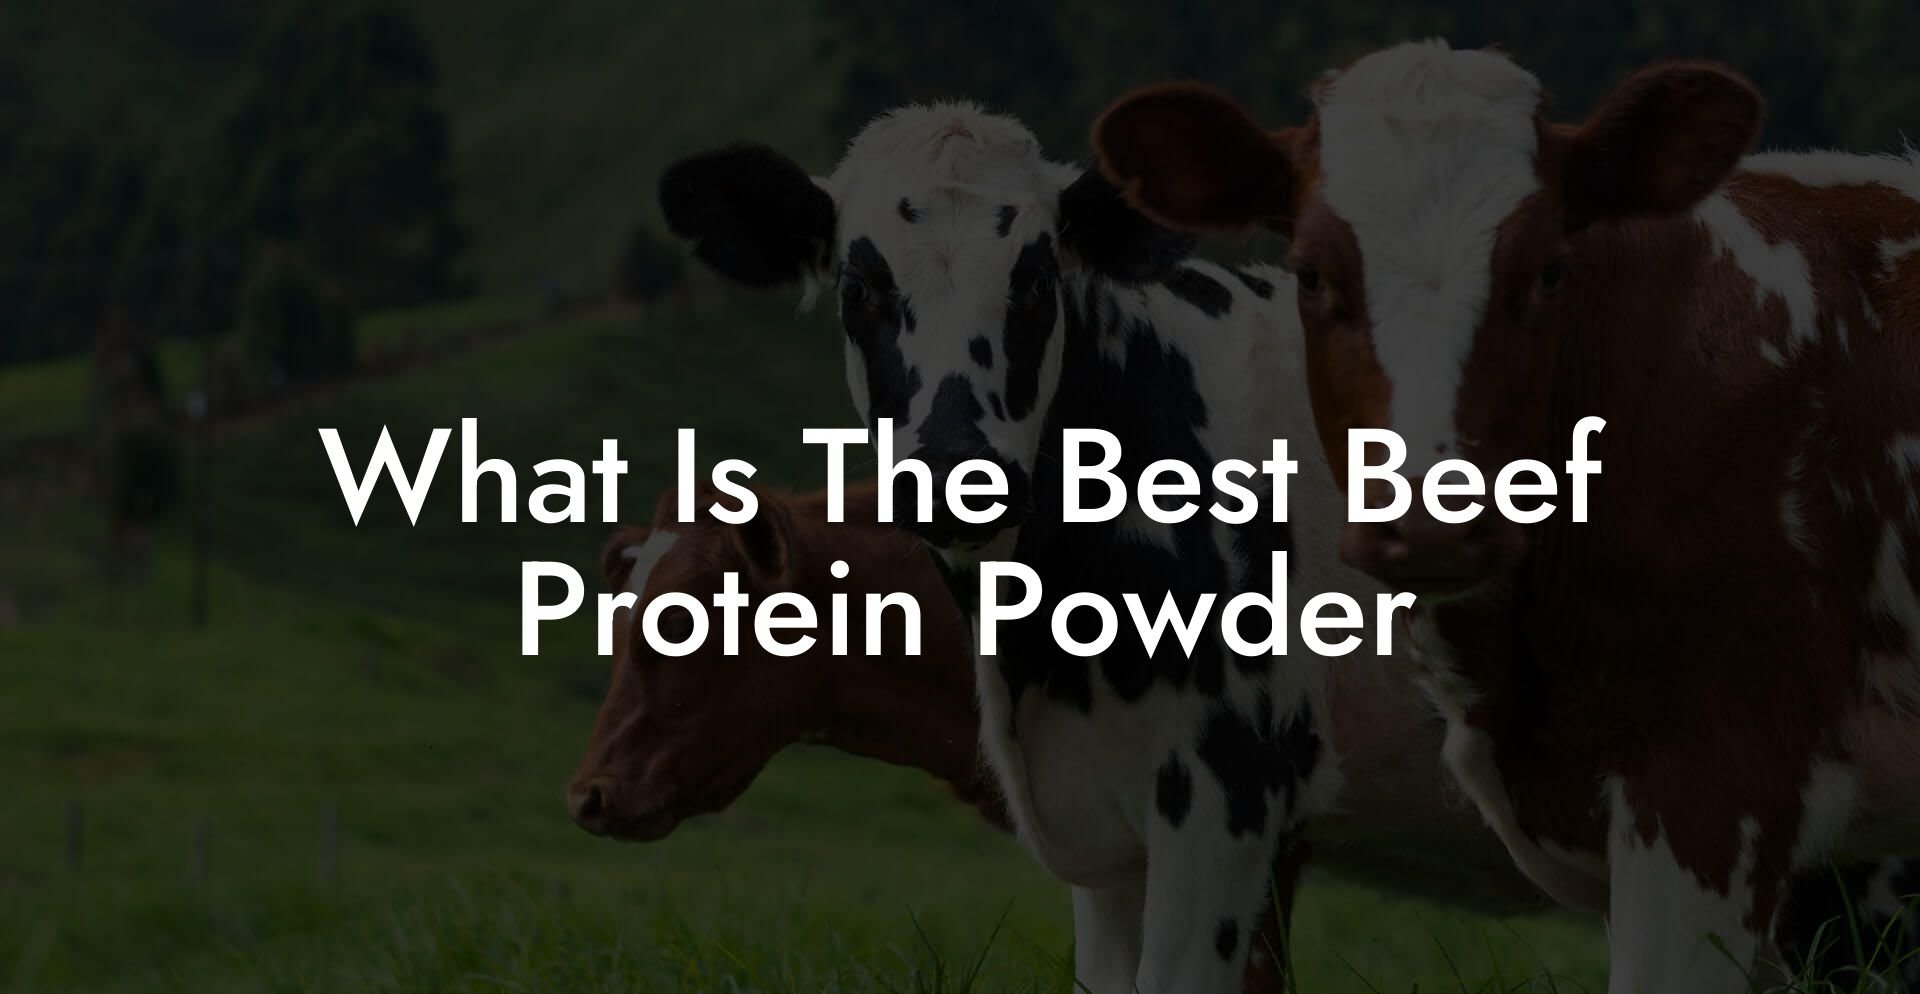 What Is The Best Beef Protein Powder